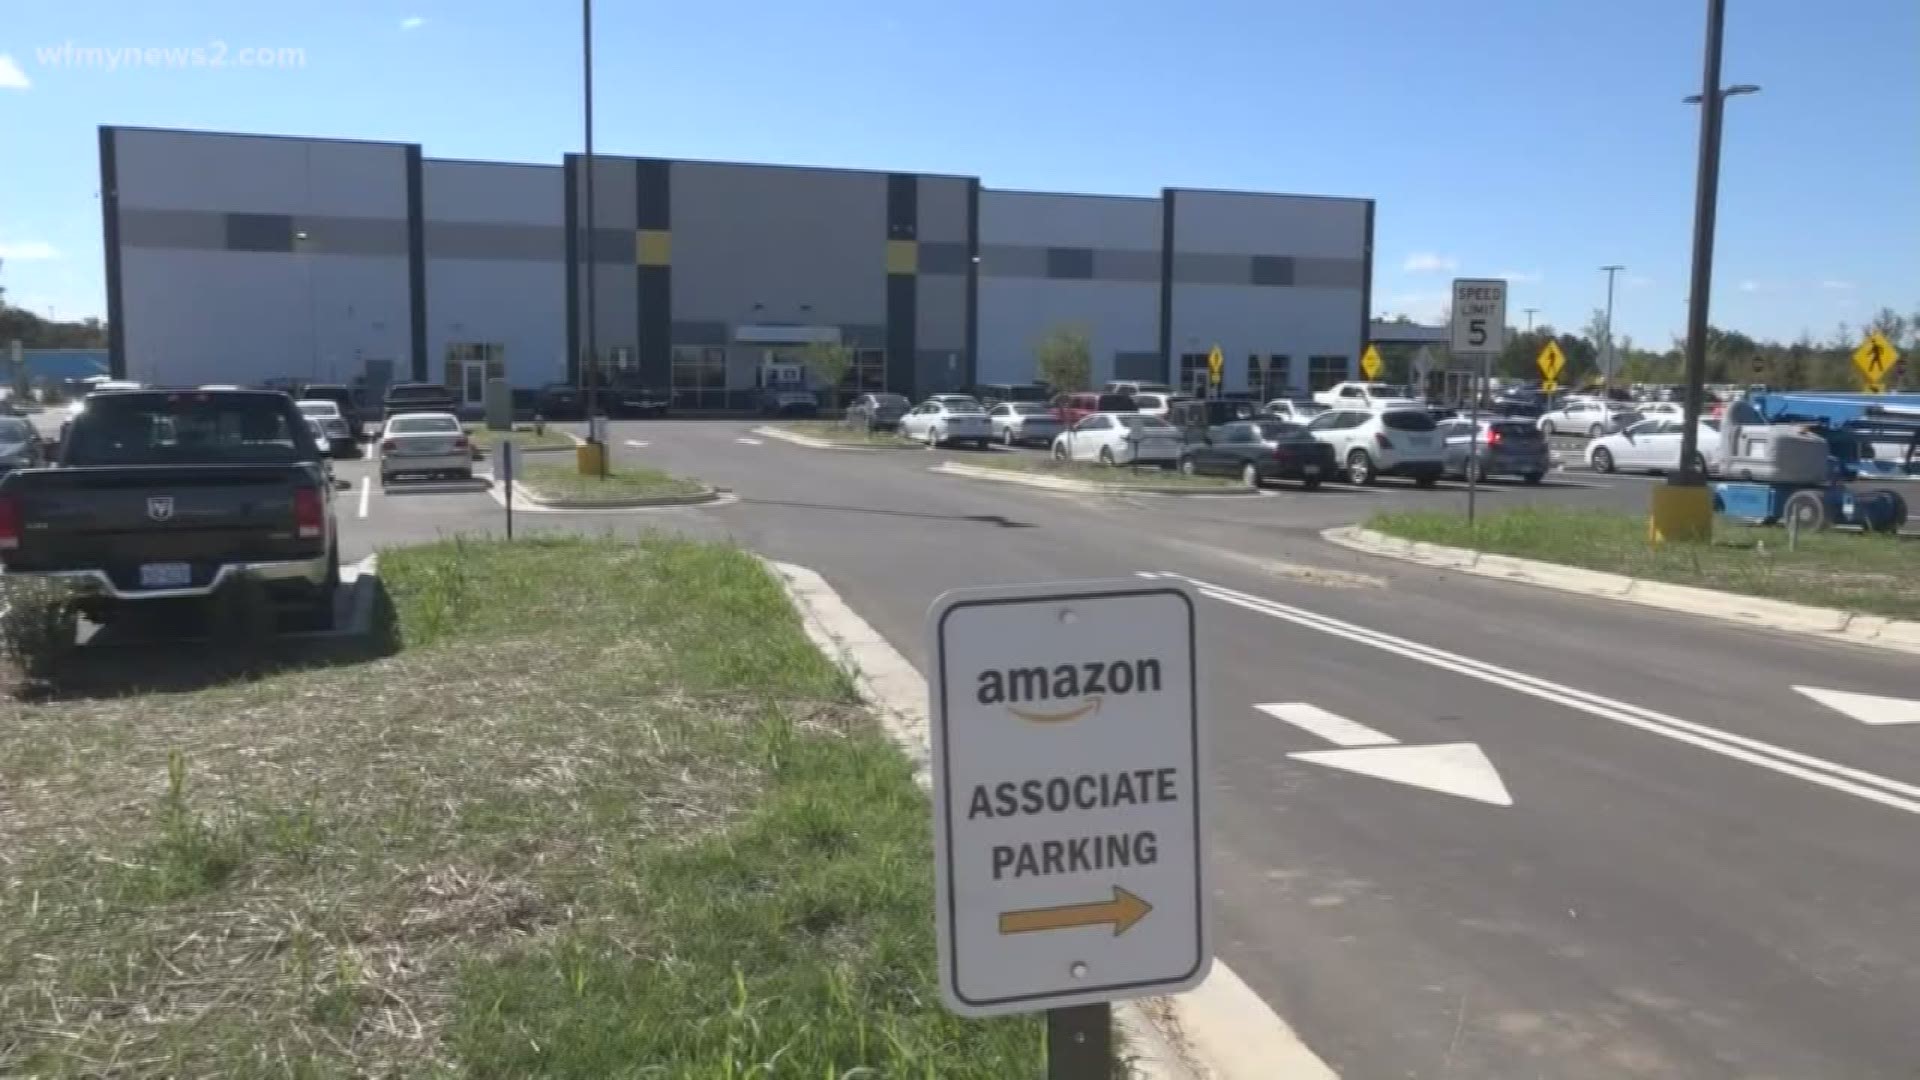 Amazon officials said the 66,000 square-foot building already has hundreds of people hard at work.